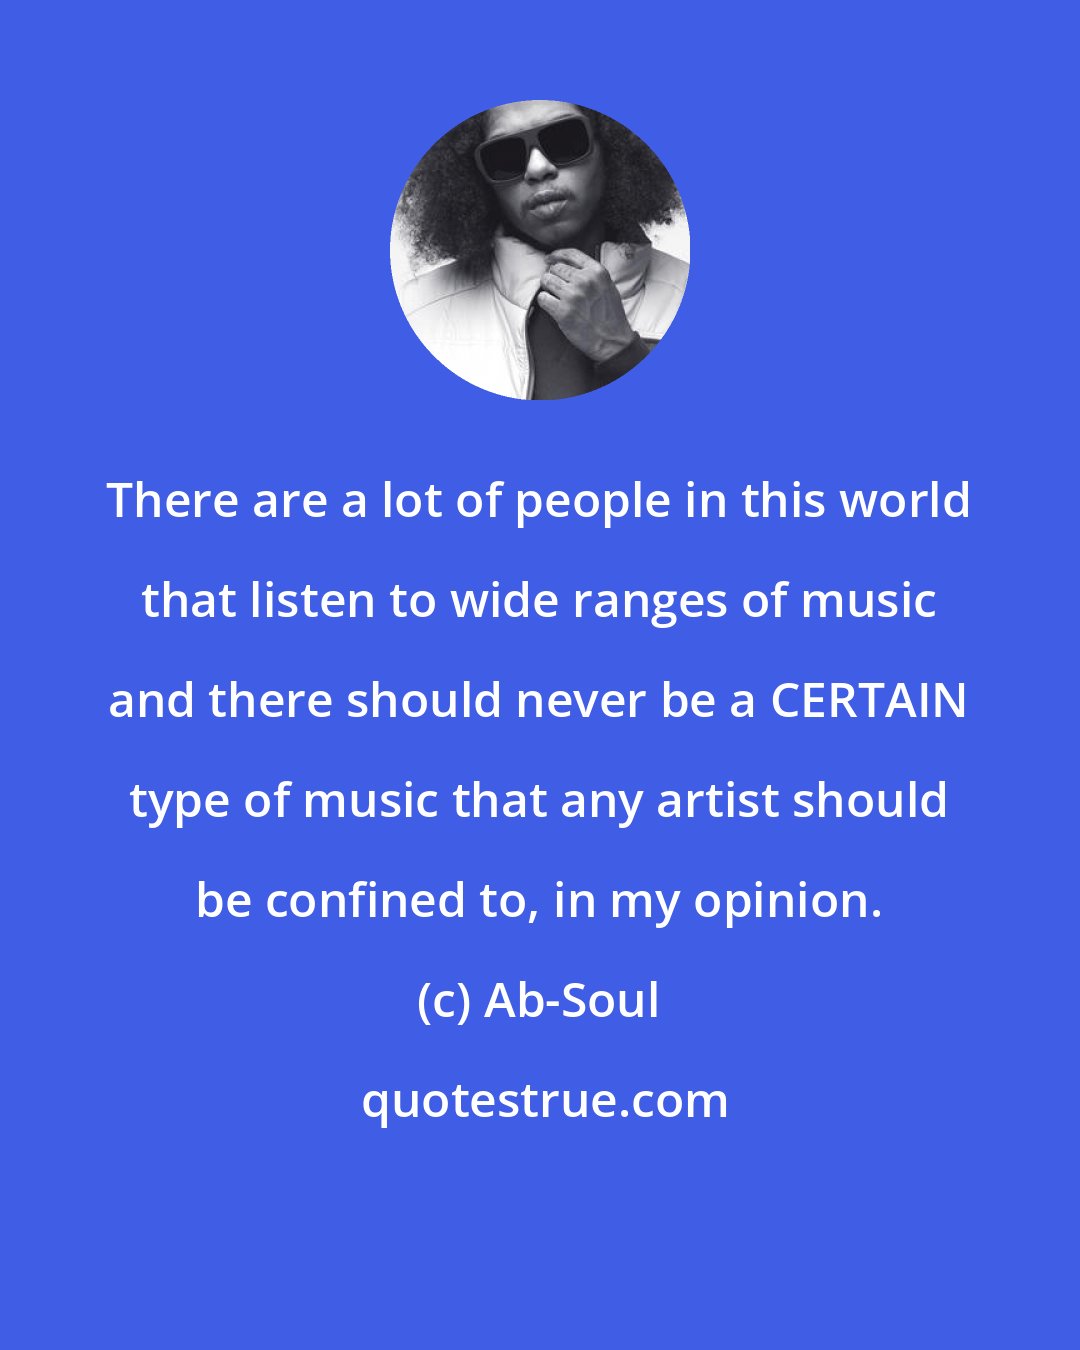 Ab-Soul: There are a lot of people in this world that listen to wide ranges of music and there should never be a CERTAIN type of music that any artist should be confined to, in my opinion.